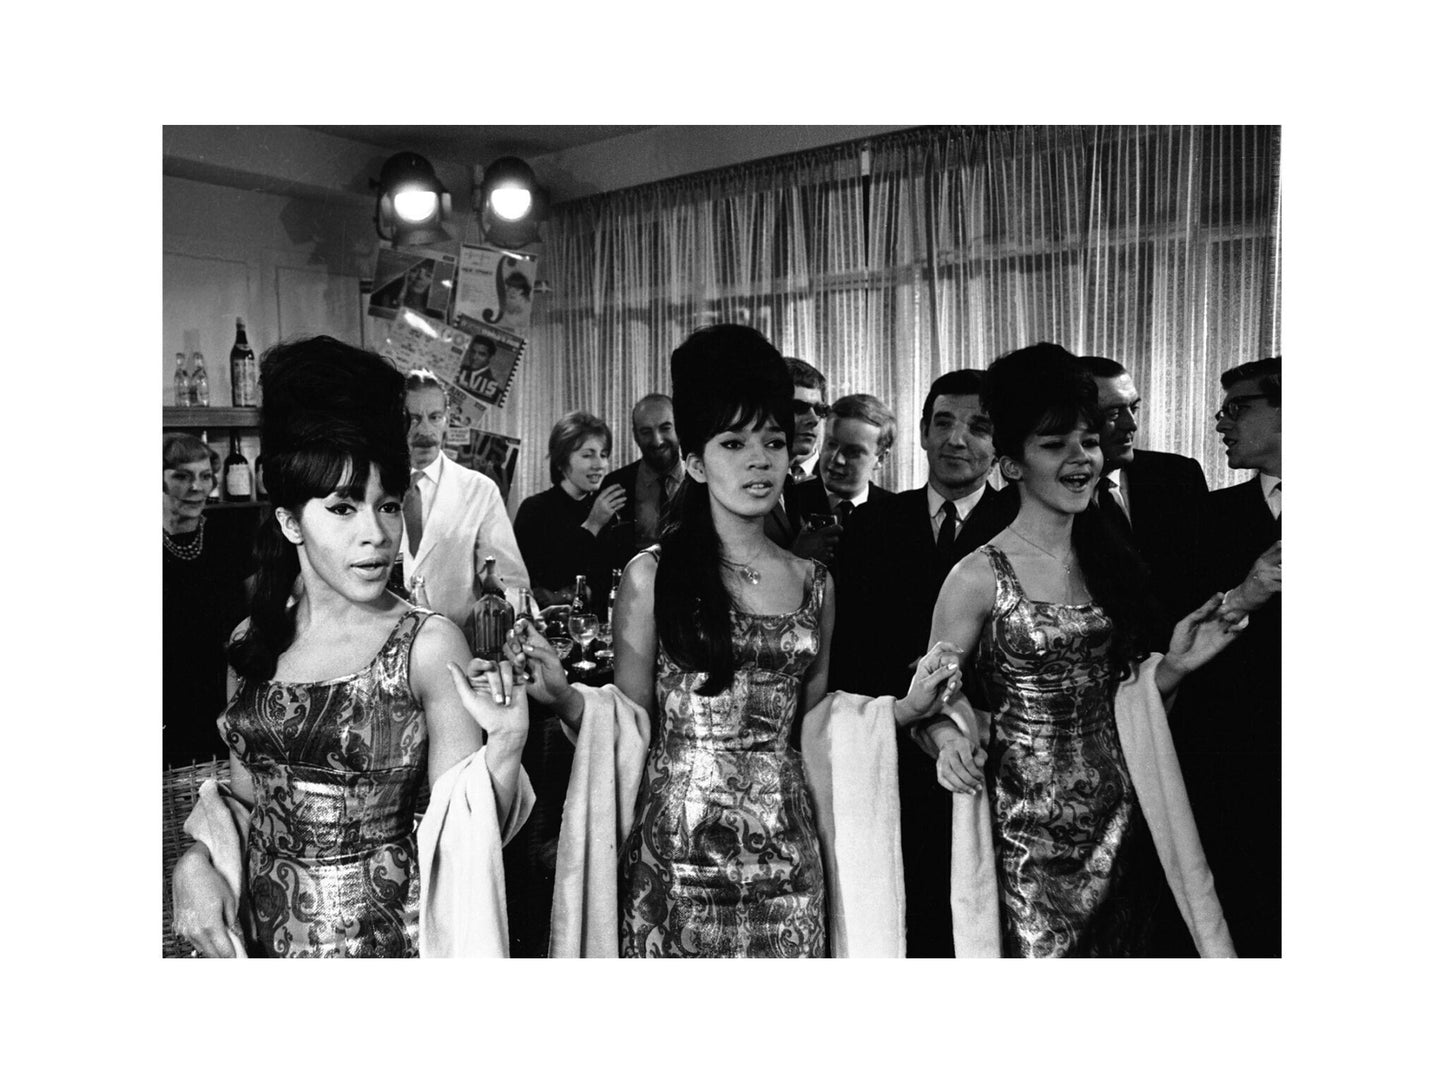 The Ronettes - Singing Live in a London Ballroom, England, 1964 Print